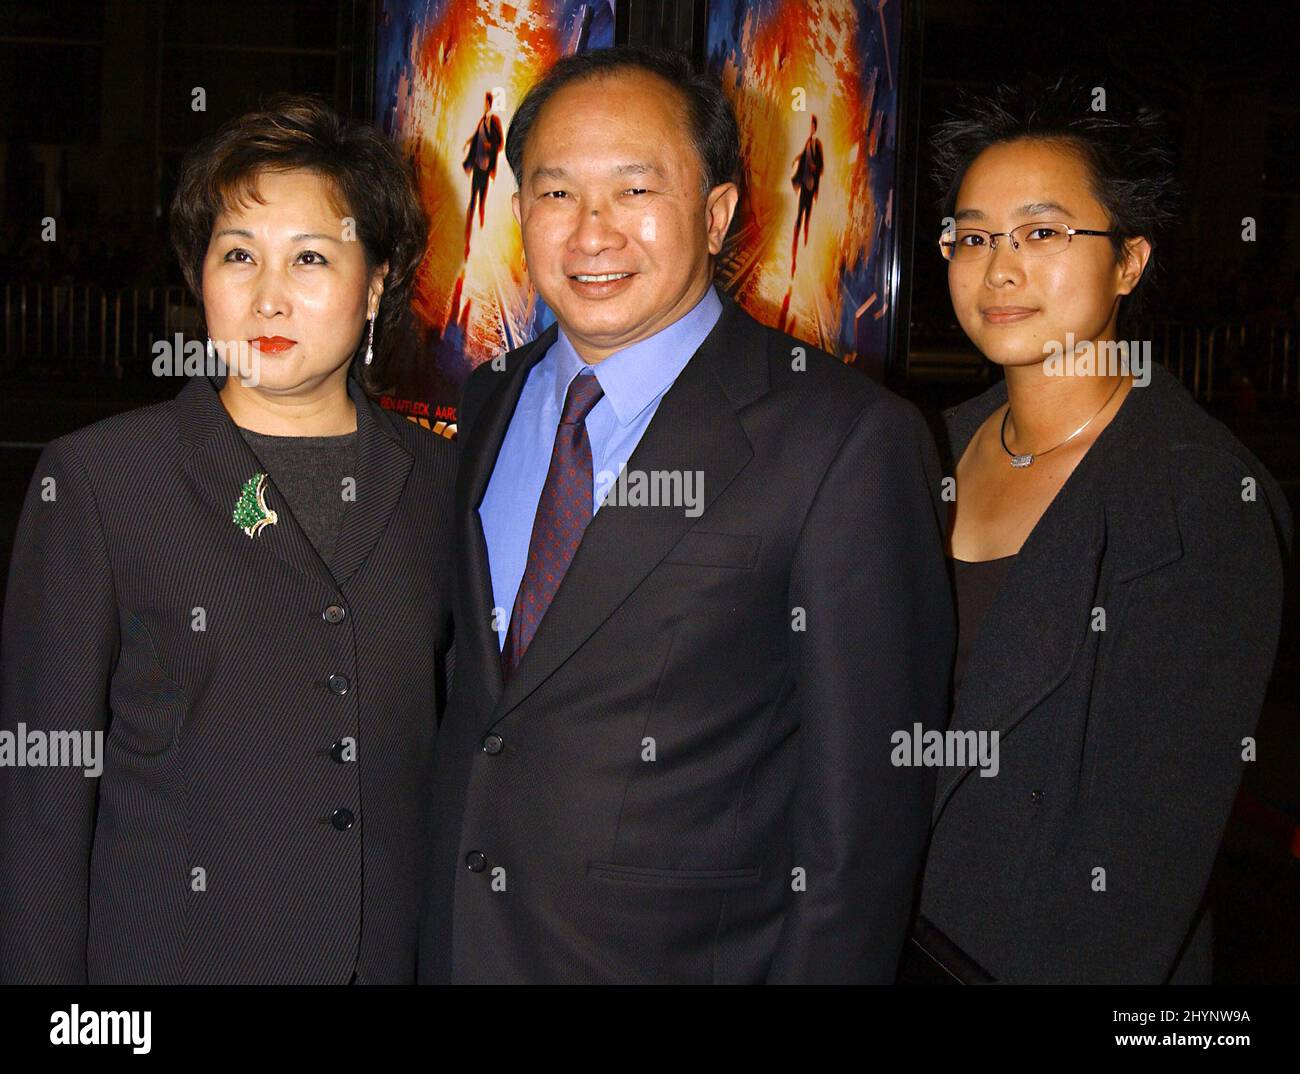 JOHN WOO ATTENDS THE 'PAYCHECK' PREMIERE AT GRAUMANN'S CHINESE THEATRE IN HOLLYWOOD. PICTURE: UK PRESS Stock Photo